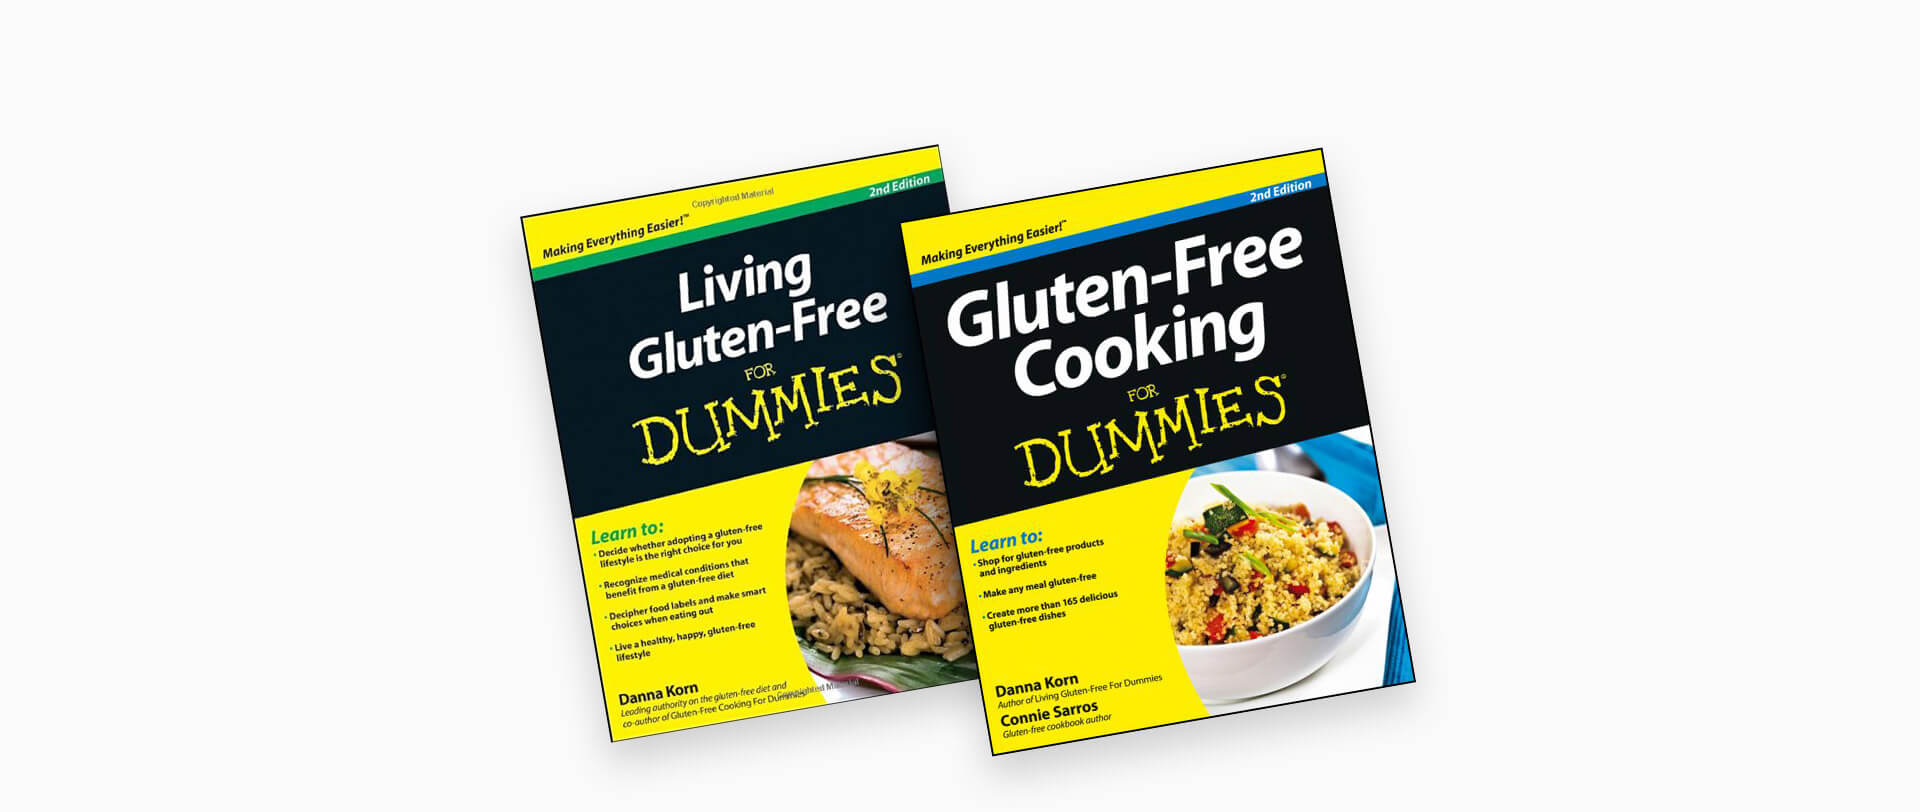 Gluten-Free Cooking for Dummies